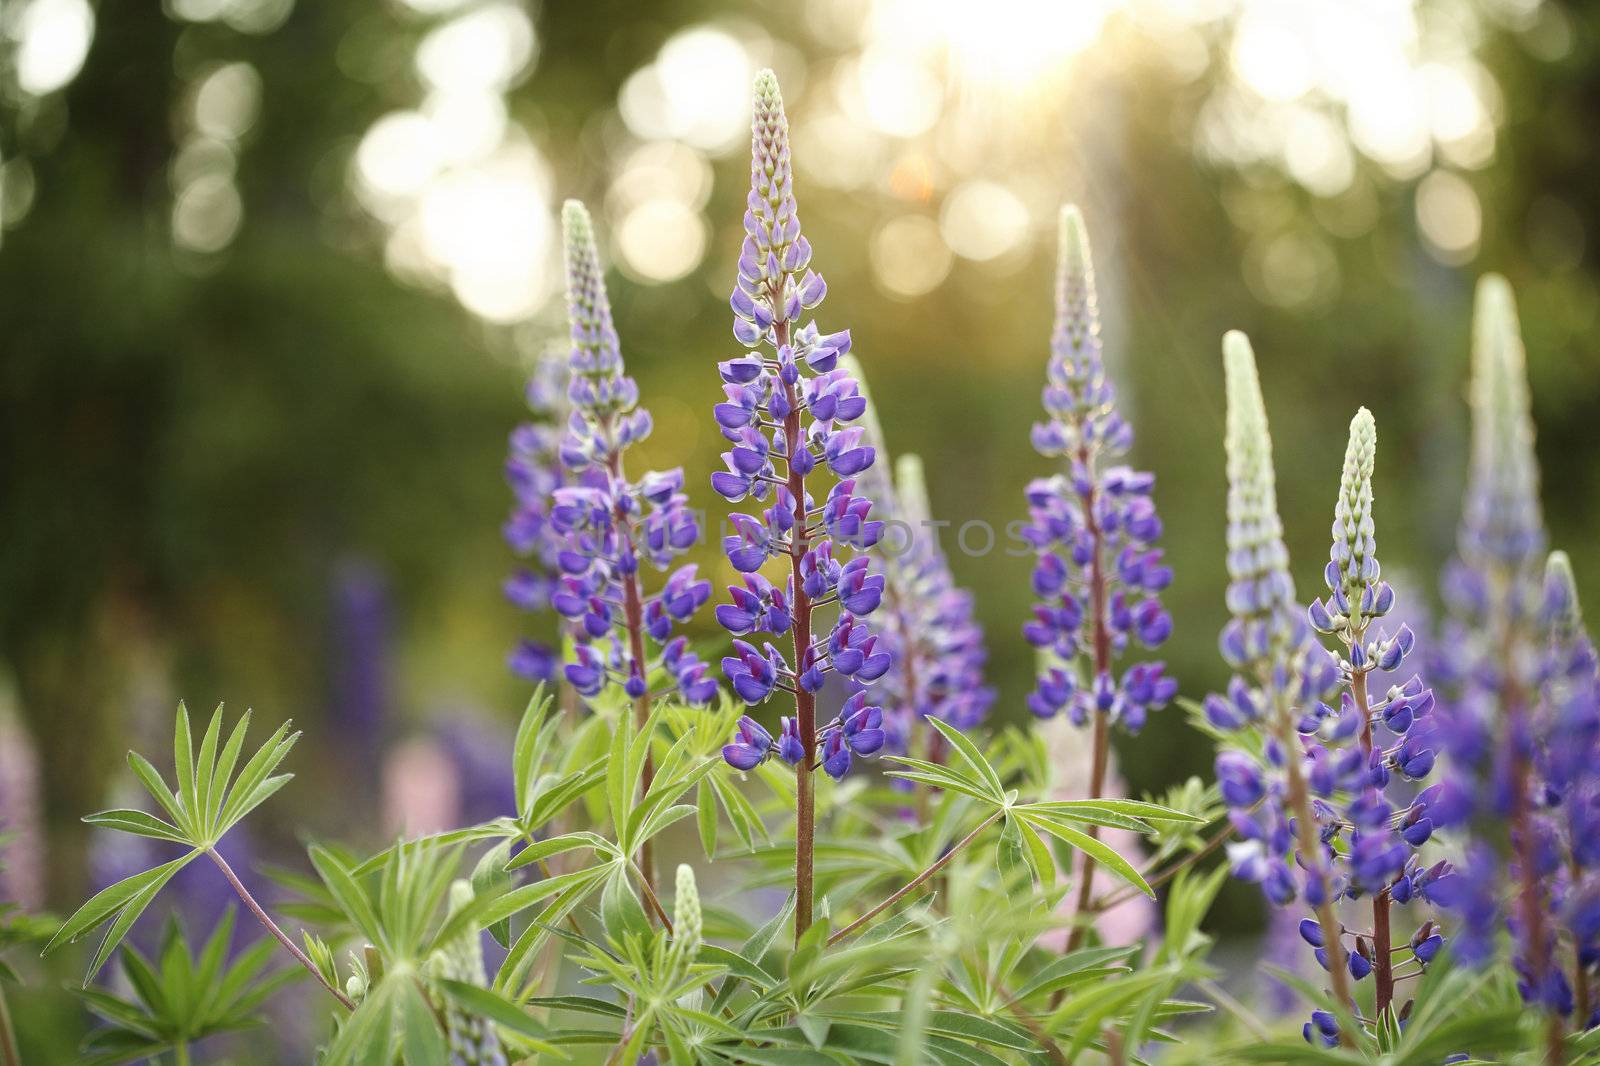 Wild Lupines by Stocksnapper